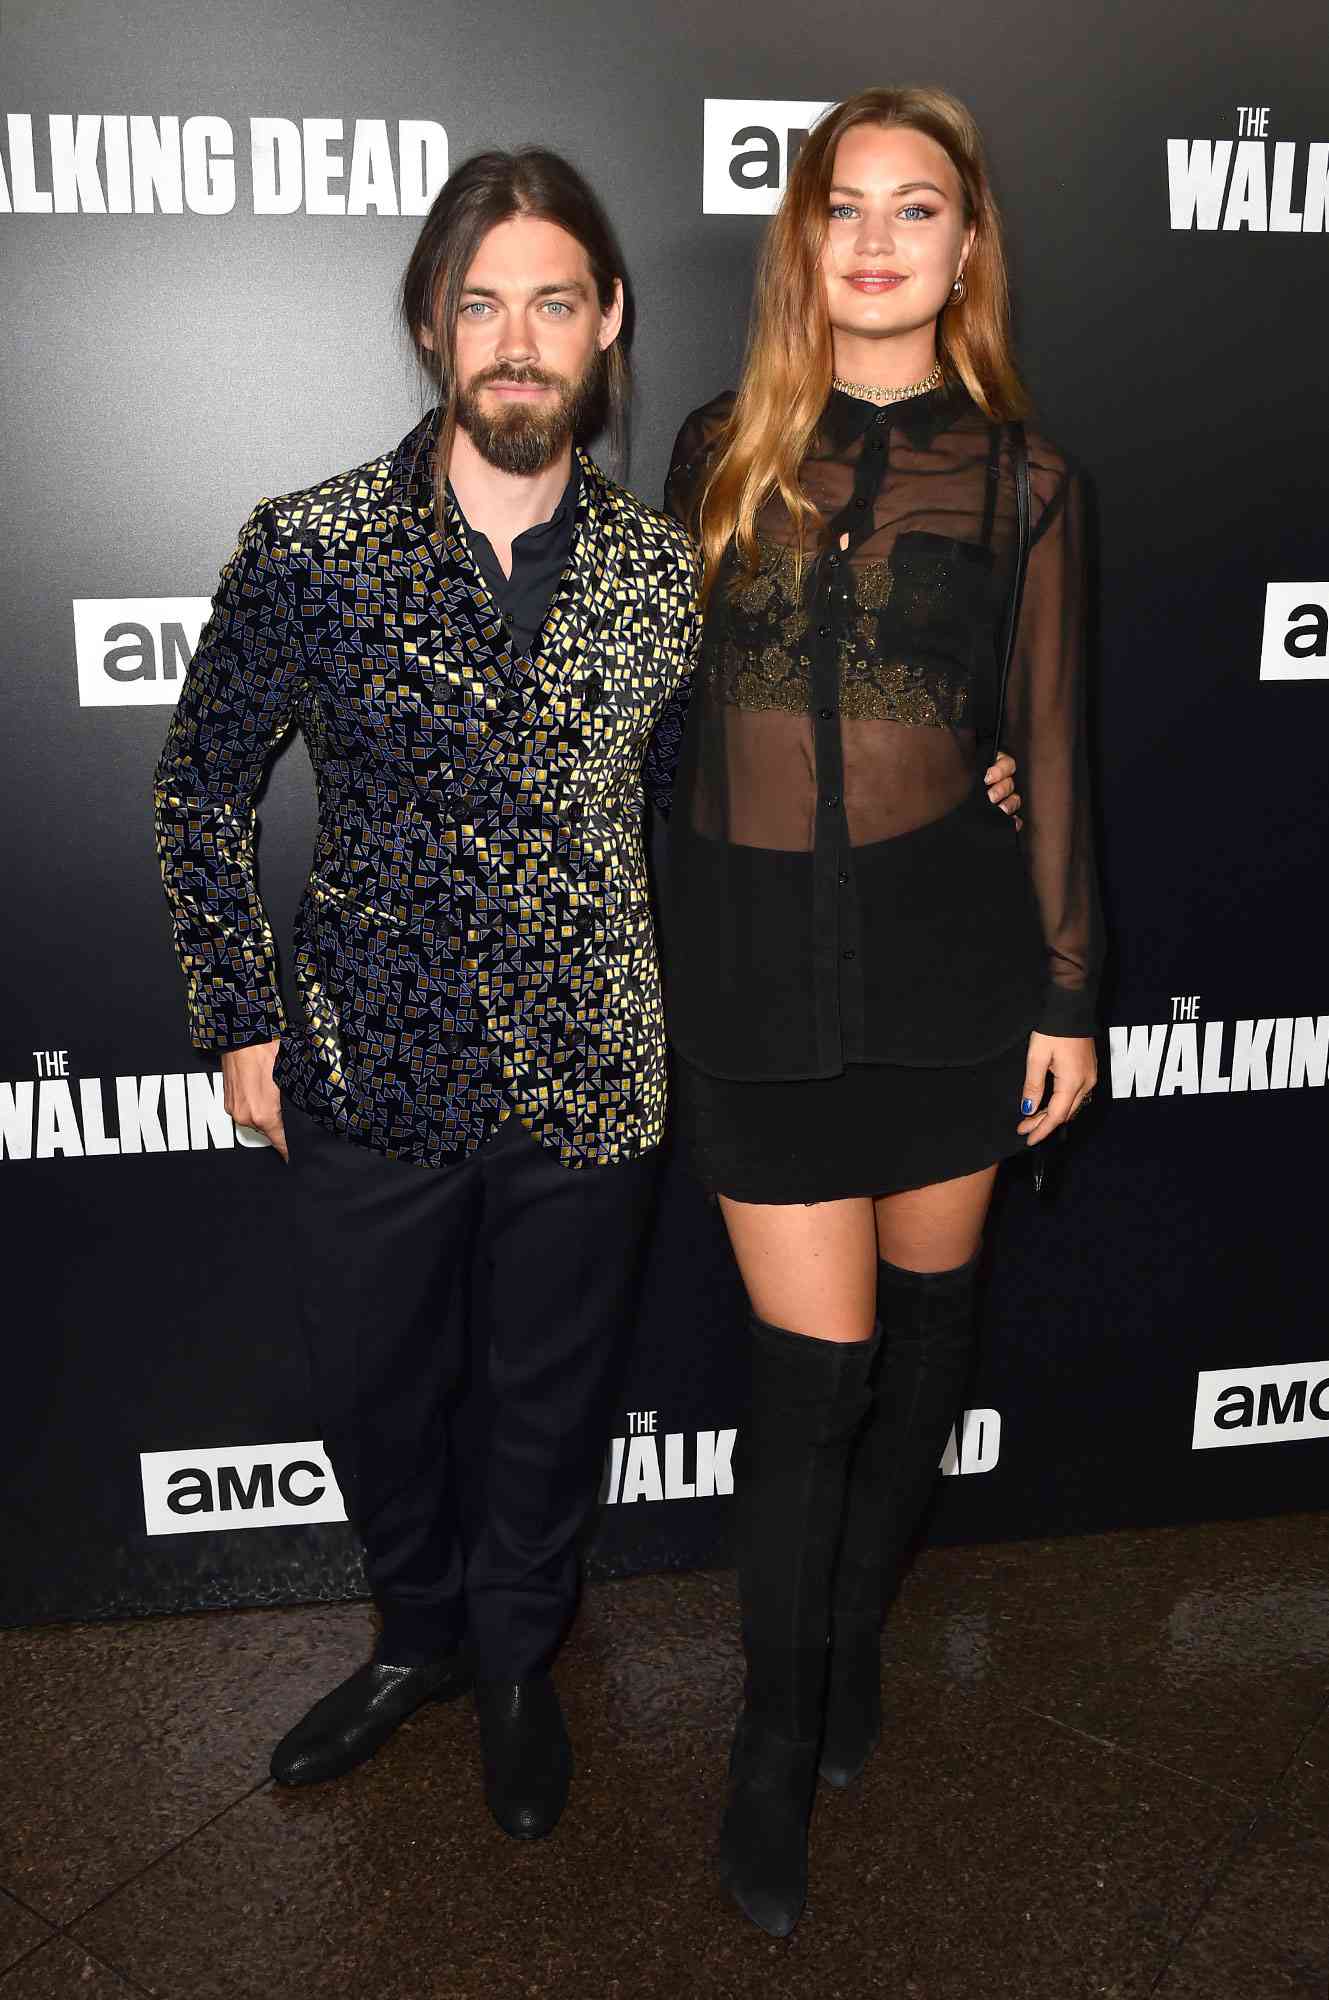 Prodigal Son Star Tom Payne Marries Jennifer Akerman People Com Well you're in luck, because here they come.